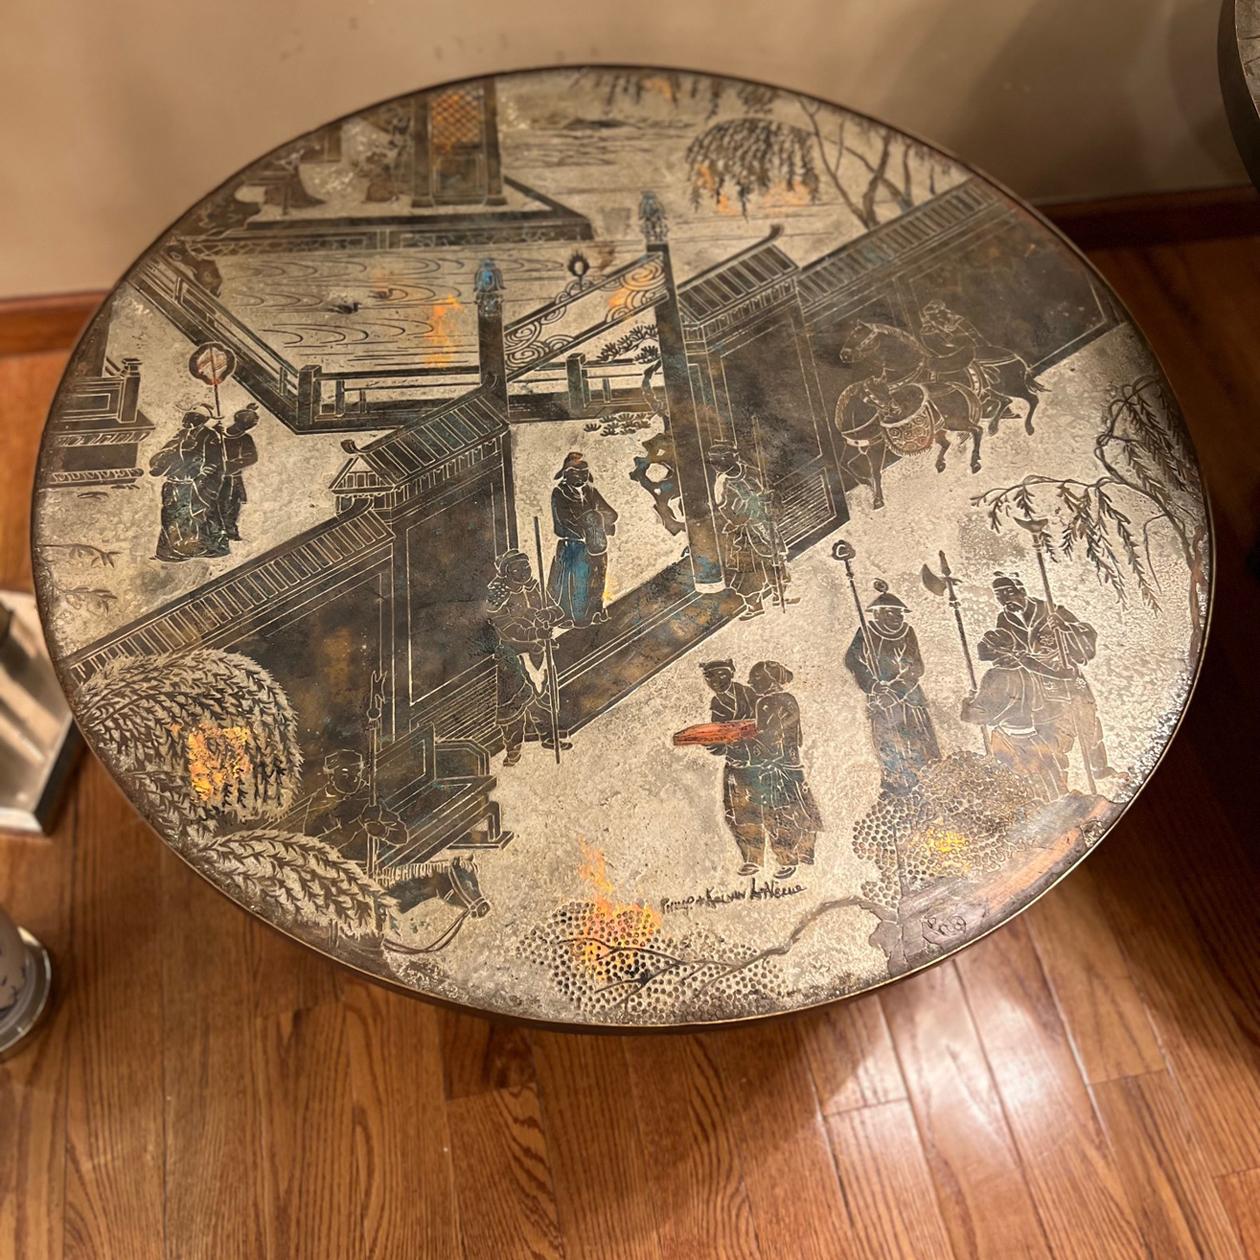 A circa 1960's American acid-etched and patinated bronze LaVerne coffee table with chinoiserie motifs, original patina and an octagonal base. 

Measurements: 
Diameter: 35.25